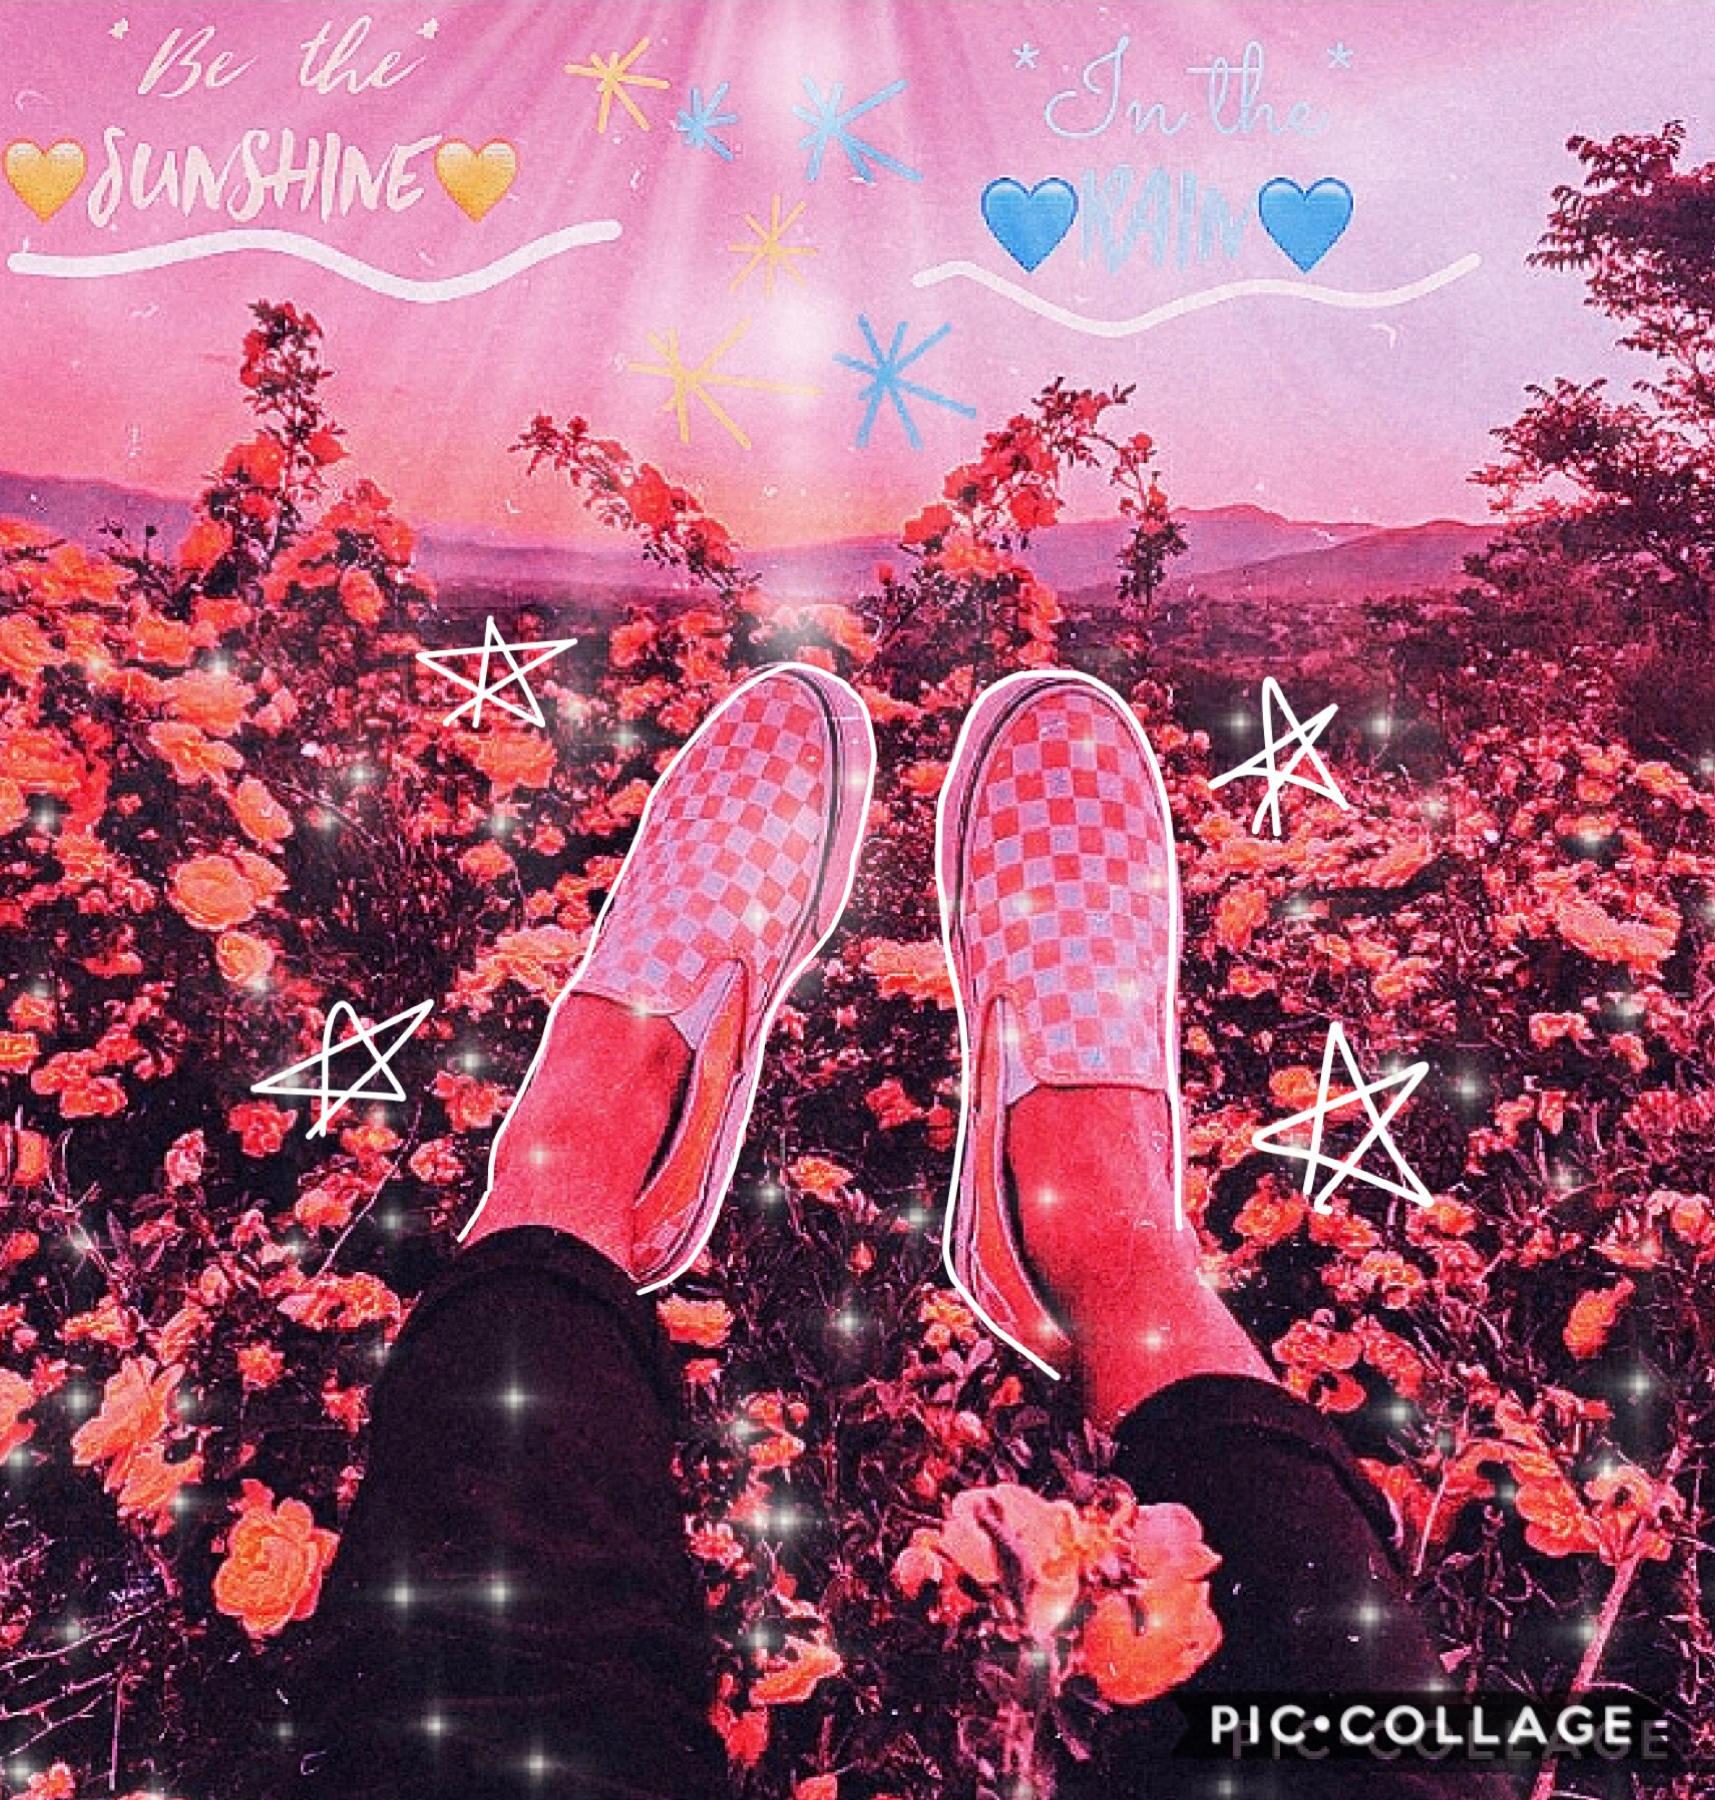 💖TAP💖

Omg this took so long hahaha😂, anyway just wanted to say to anyone reading this...HAVE A AMAZING DAY LUV!!❤️❤️

💜Xo-Cloe18-oX💜
